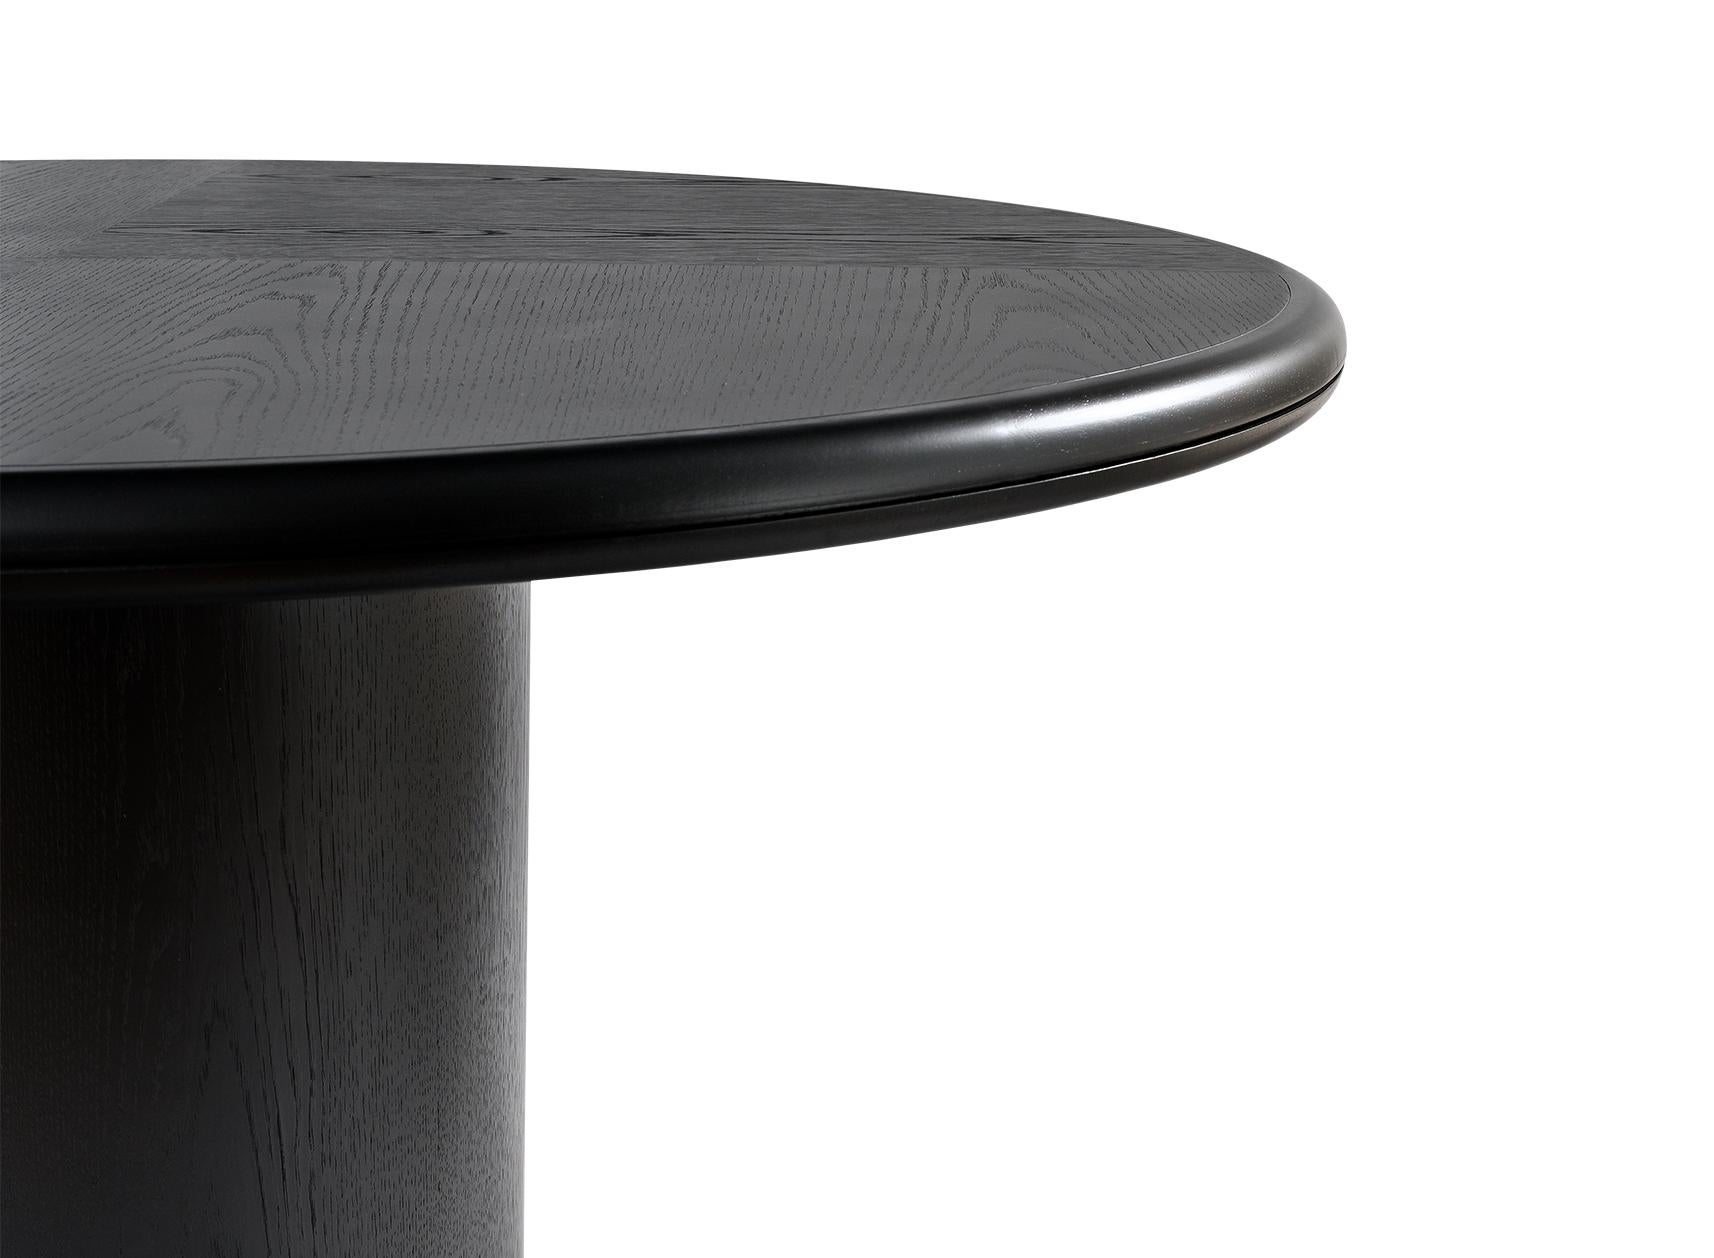 MOON
Black brushed oak, round dining table.
Available in different dimensions.

Designed by Buket Hoscan Bazman.